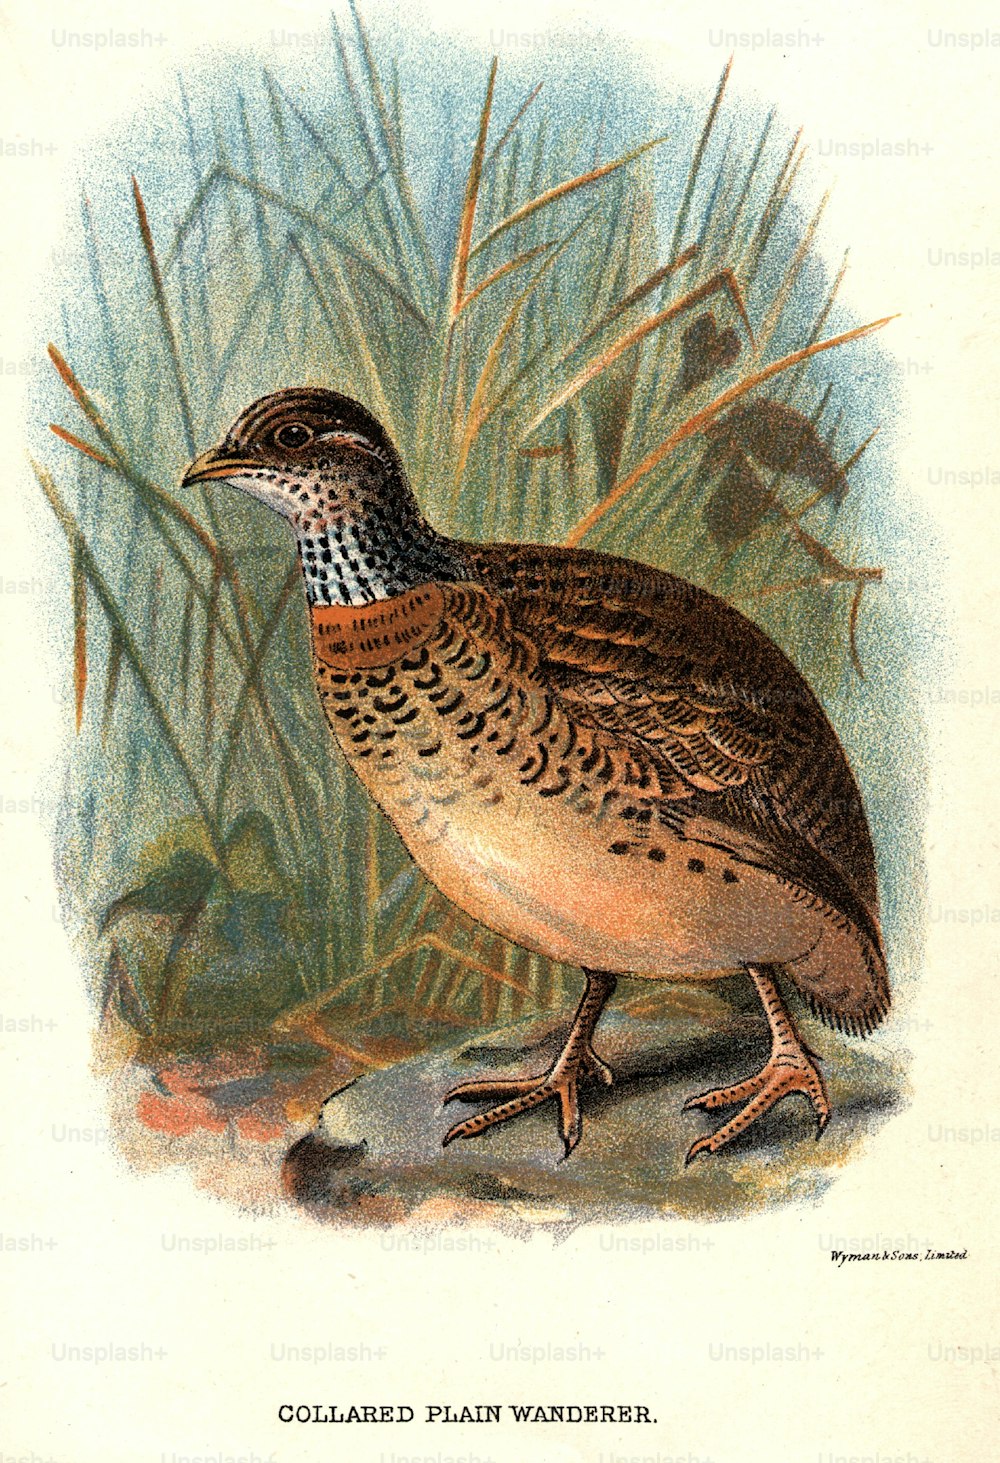 circa 1800:  The Collared Plain Wanderer, a type of quail.  (Photo by Hulton Archive/Getty Images)